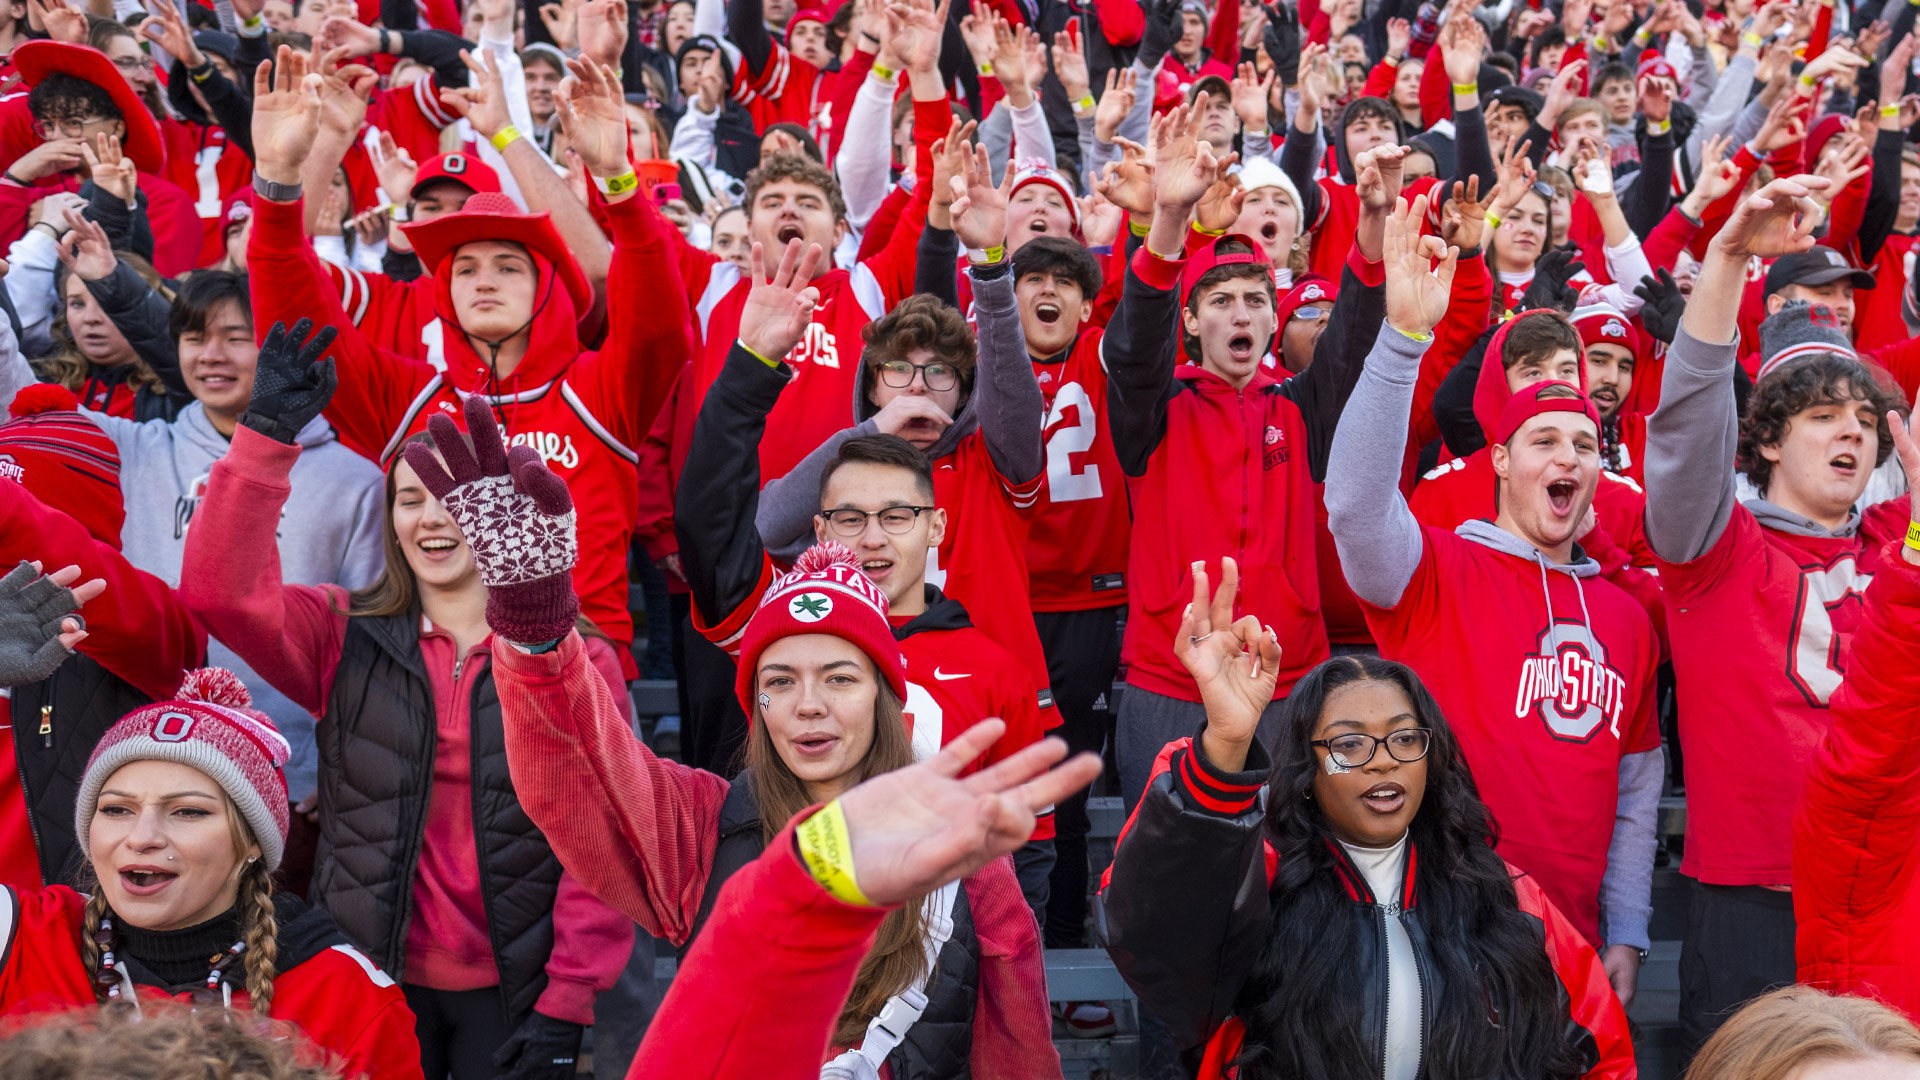 Ohio State students wearing Ohio State clothing in the student section during a football game